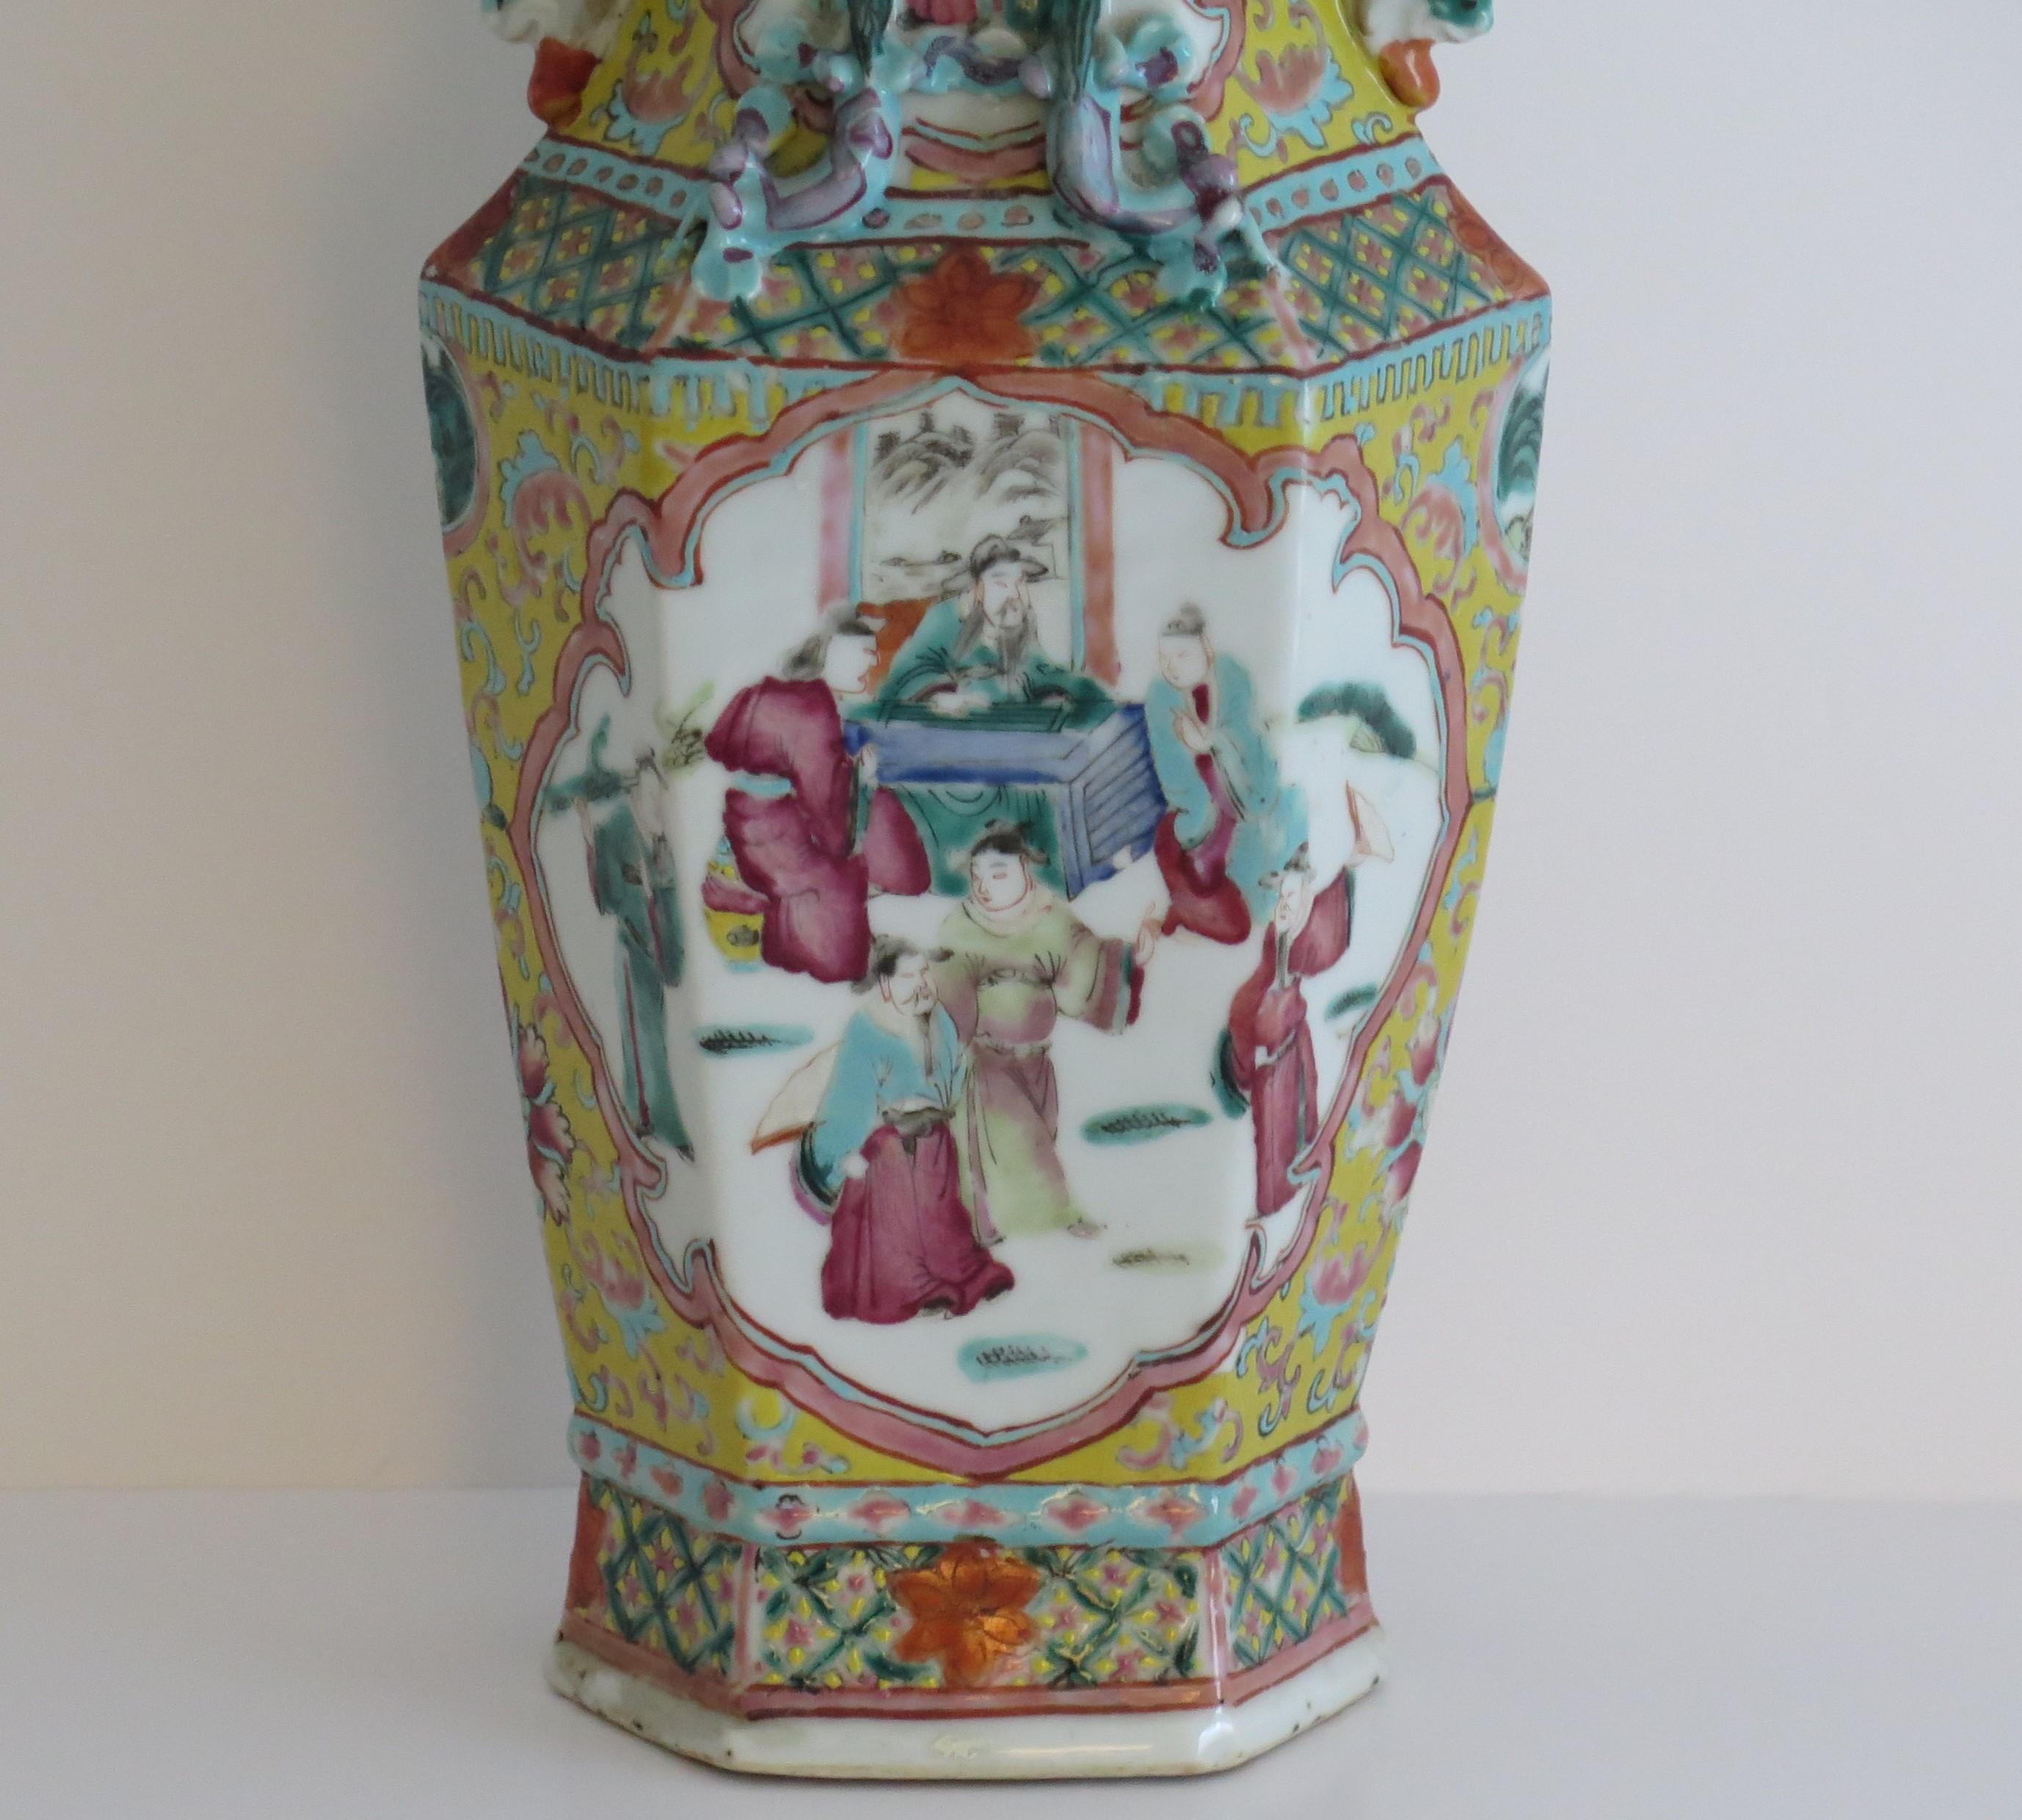 Chinese Export Vase Famille Rose Porcelain, Late Qing or Early Republic Period 1